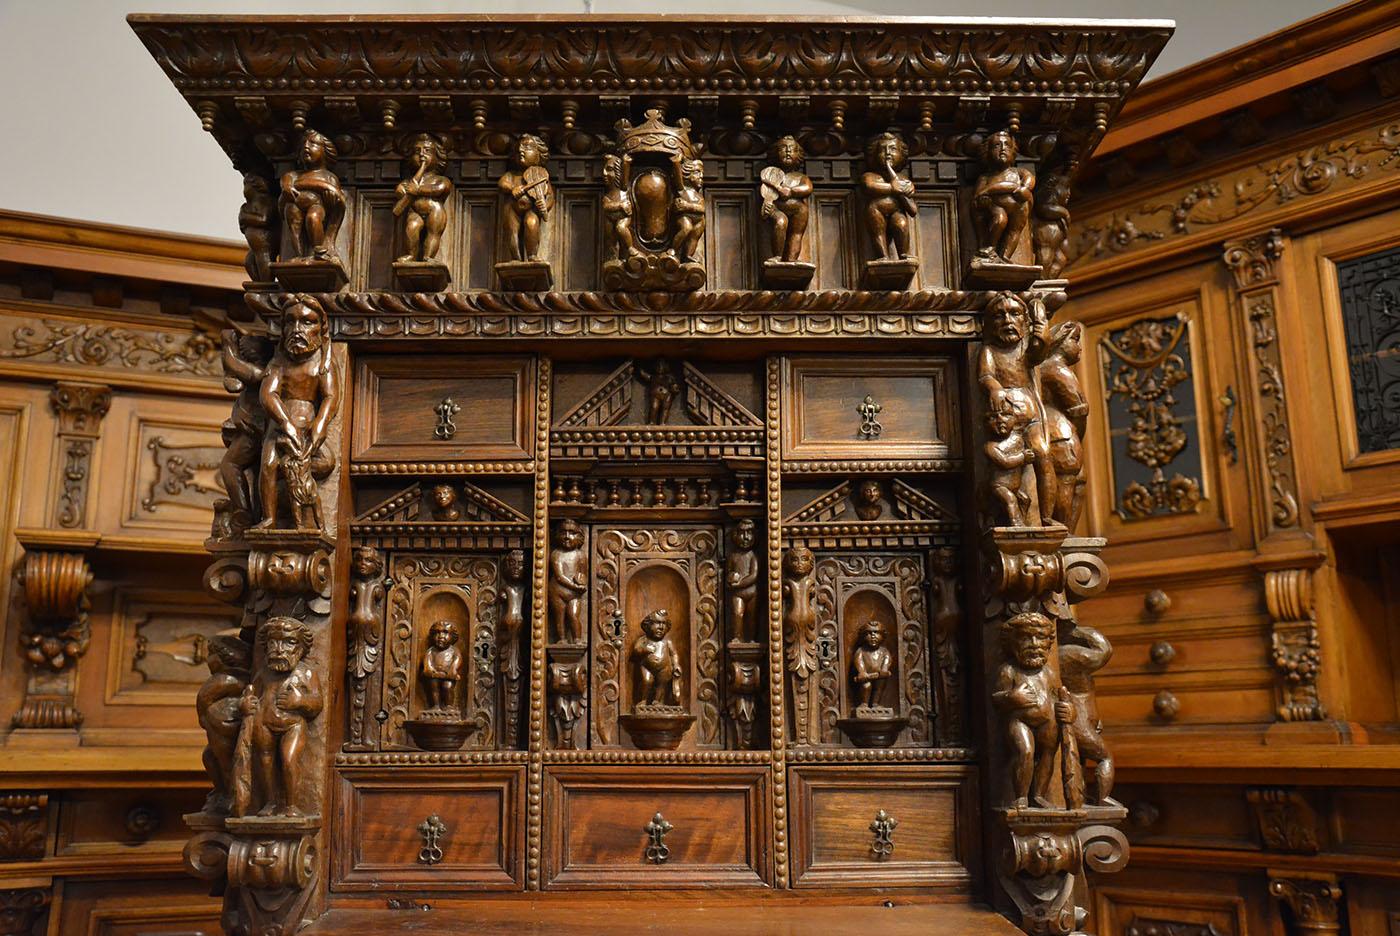 Richly carved cabinet - dressing table in the style of the Italian Renaissance. Dated at the turn of the 18th / 19th century, made of walnut wood.

This piece of furniture is the so-called 